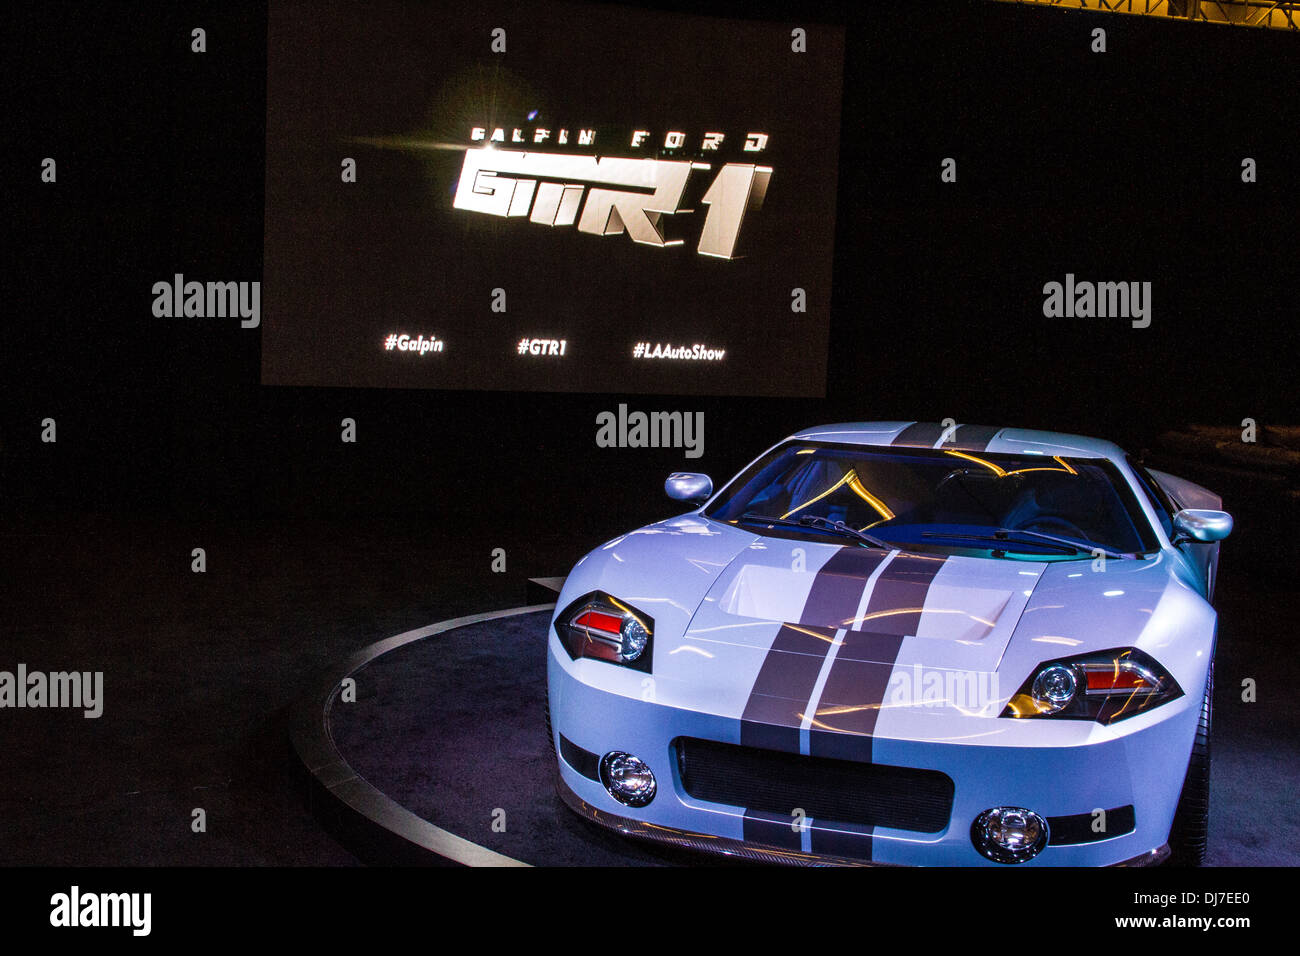 The Galpin Ford GTR 1 at the 2013 Los Angeles International Auto Show Stock Photo